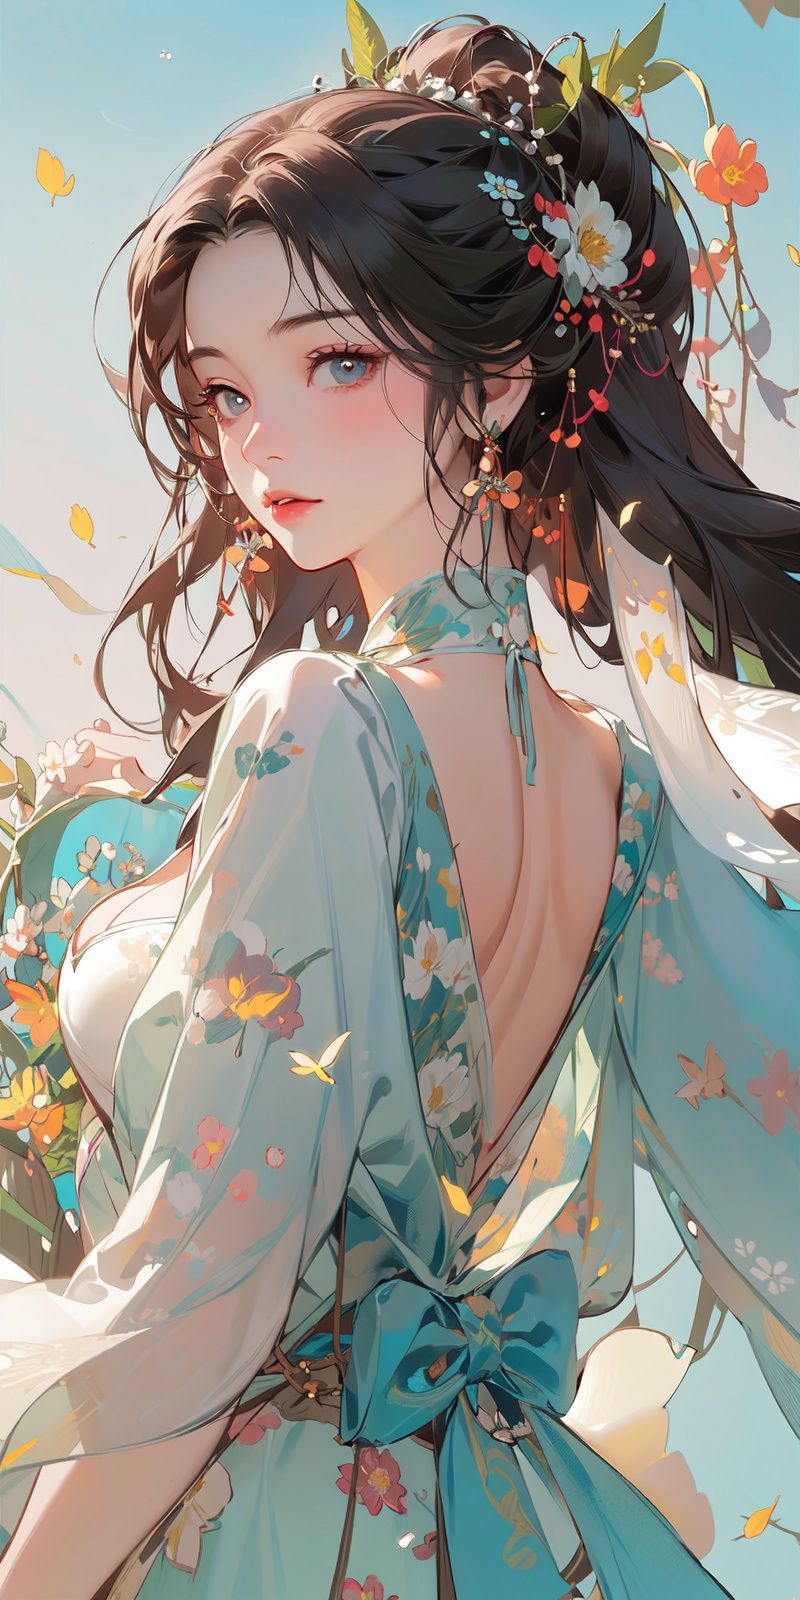 nsfw,(Masterpiece:1.2, high quality), (pixiv:1.4),cowboy shot, Eyebrows like willow leaves, ,The face is as beautiful as a flower, the eyes are tender. Small waist, big breasts, revealing cleavage; Lips slightly open, seductive expression. <lora:Chinese style_20230608163116-000018:0.8>